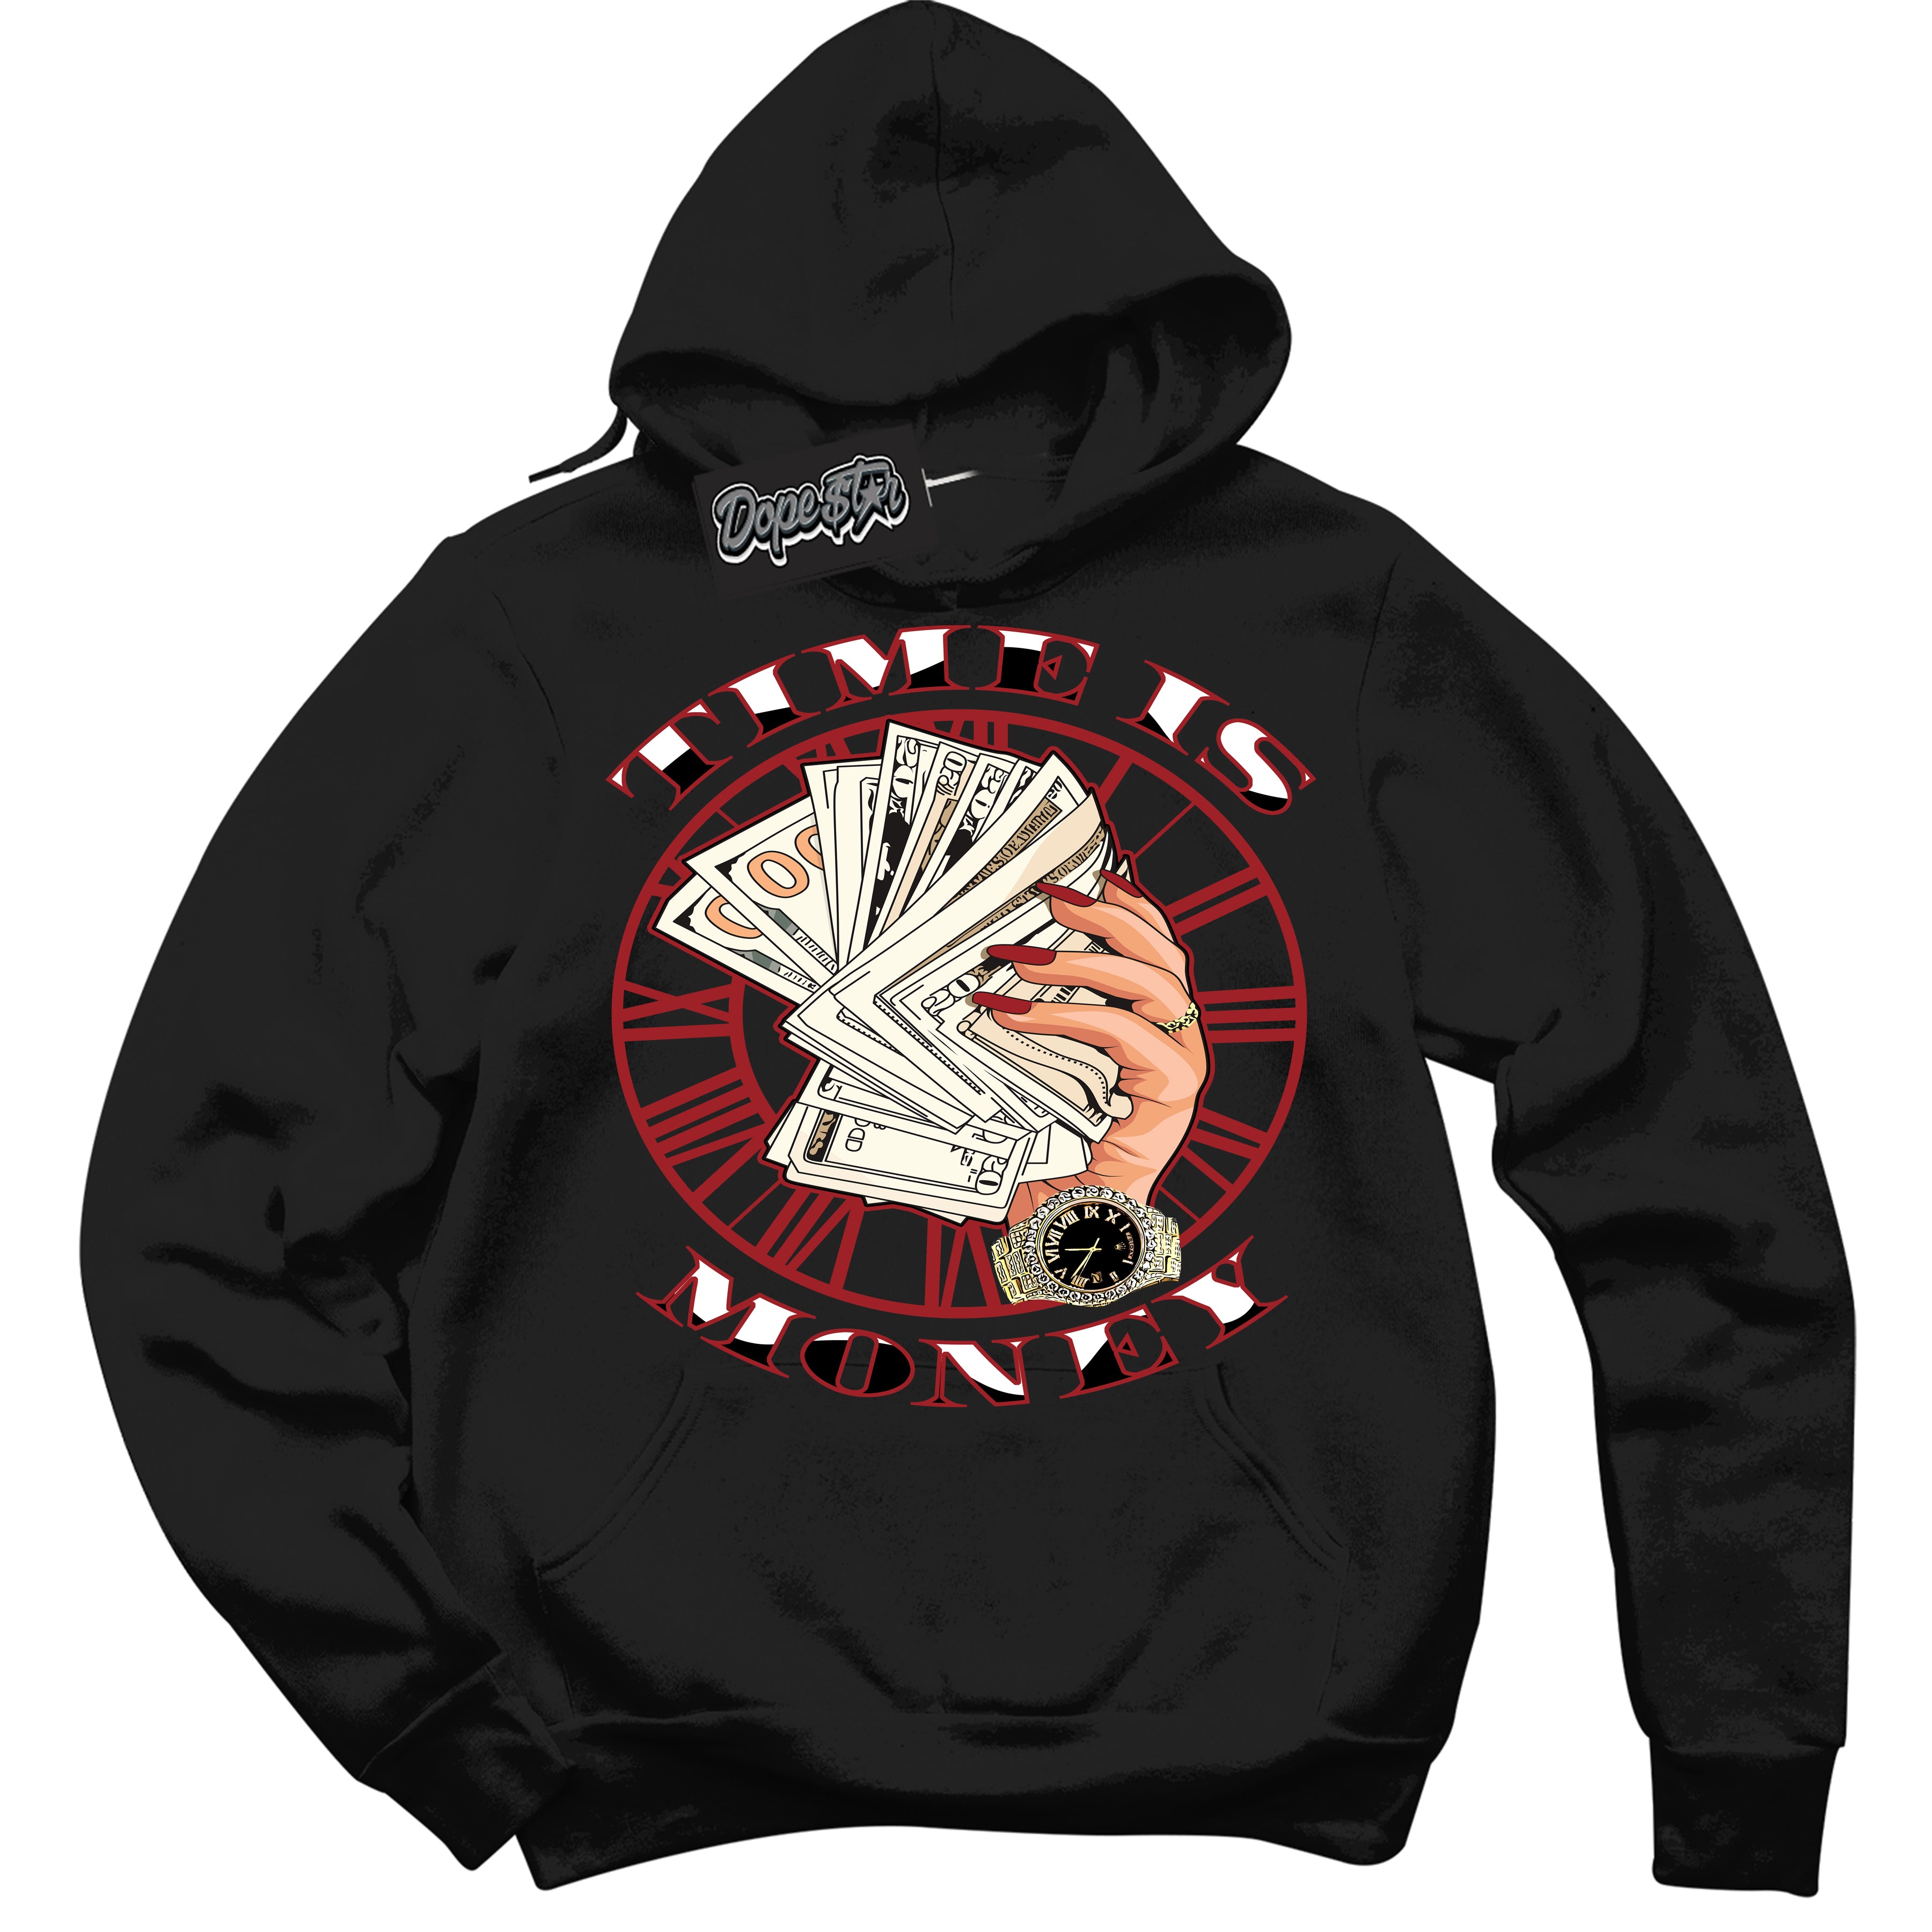 Cool Black Hoodie With “ Time Is Money “ Design That Perfectly Matches Lost And Found 1s Sneakers